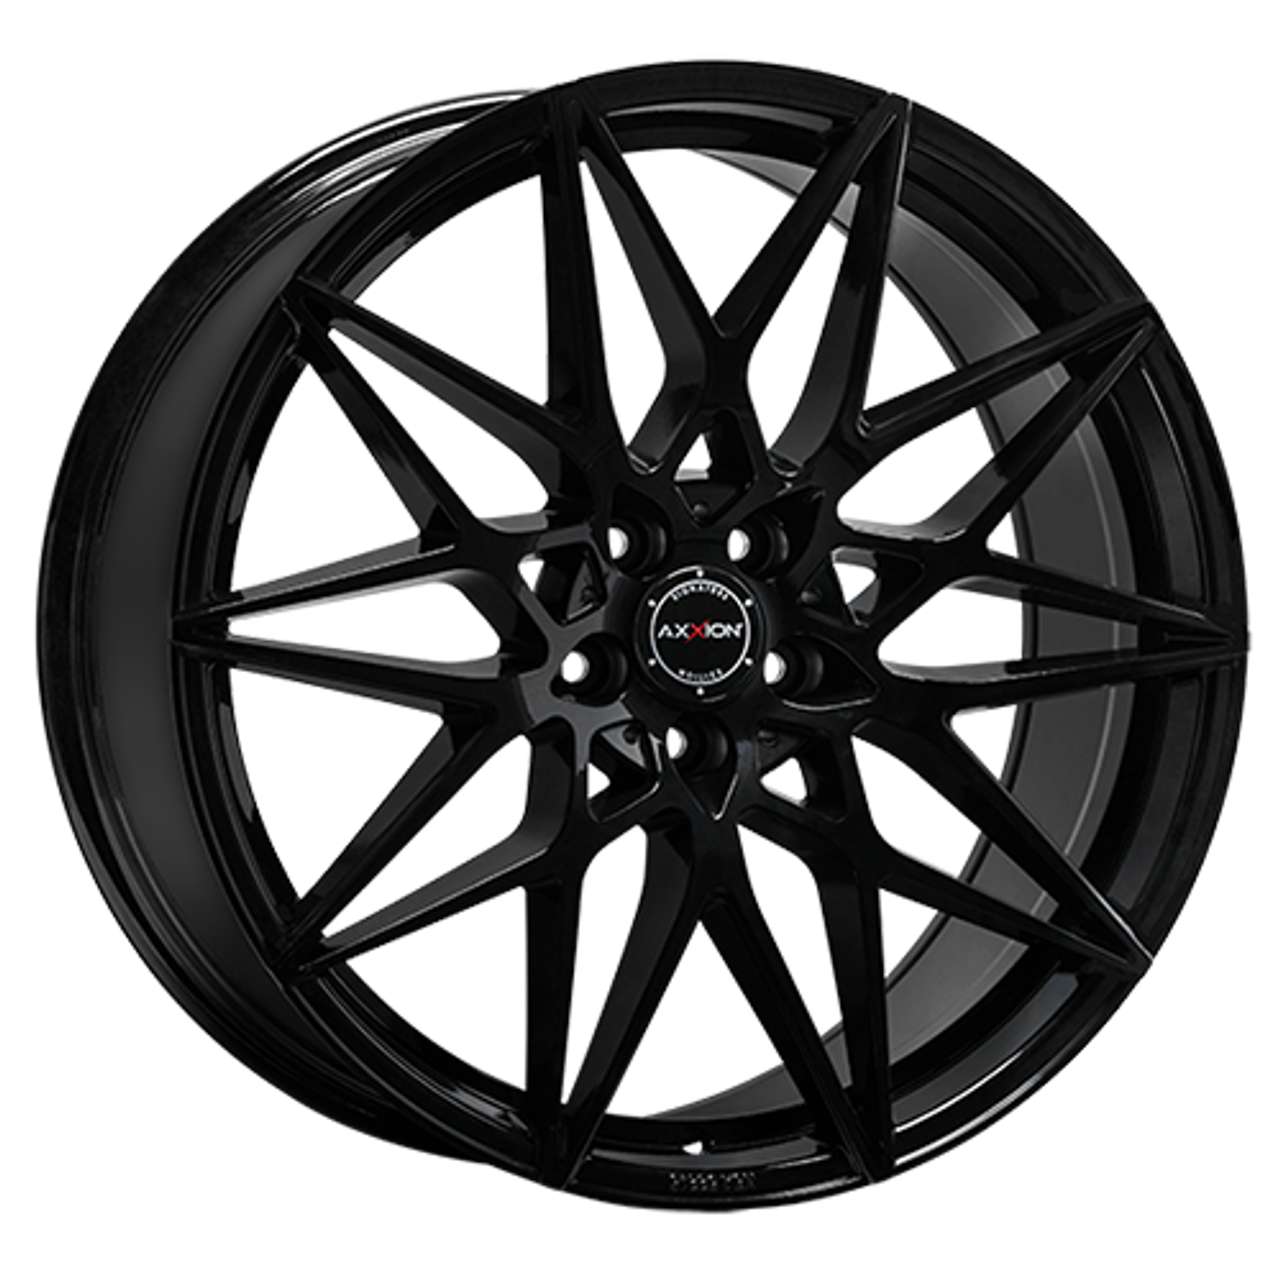 AXXION AX9 black glossy painted 8.5Jx19 5x112 ET45